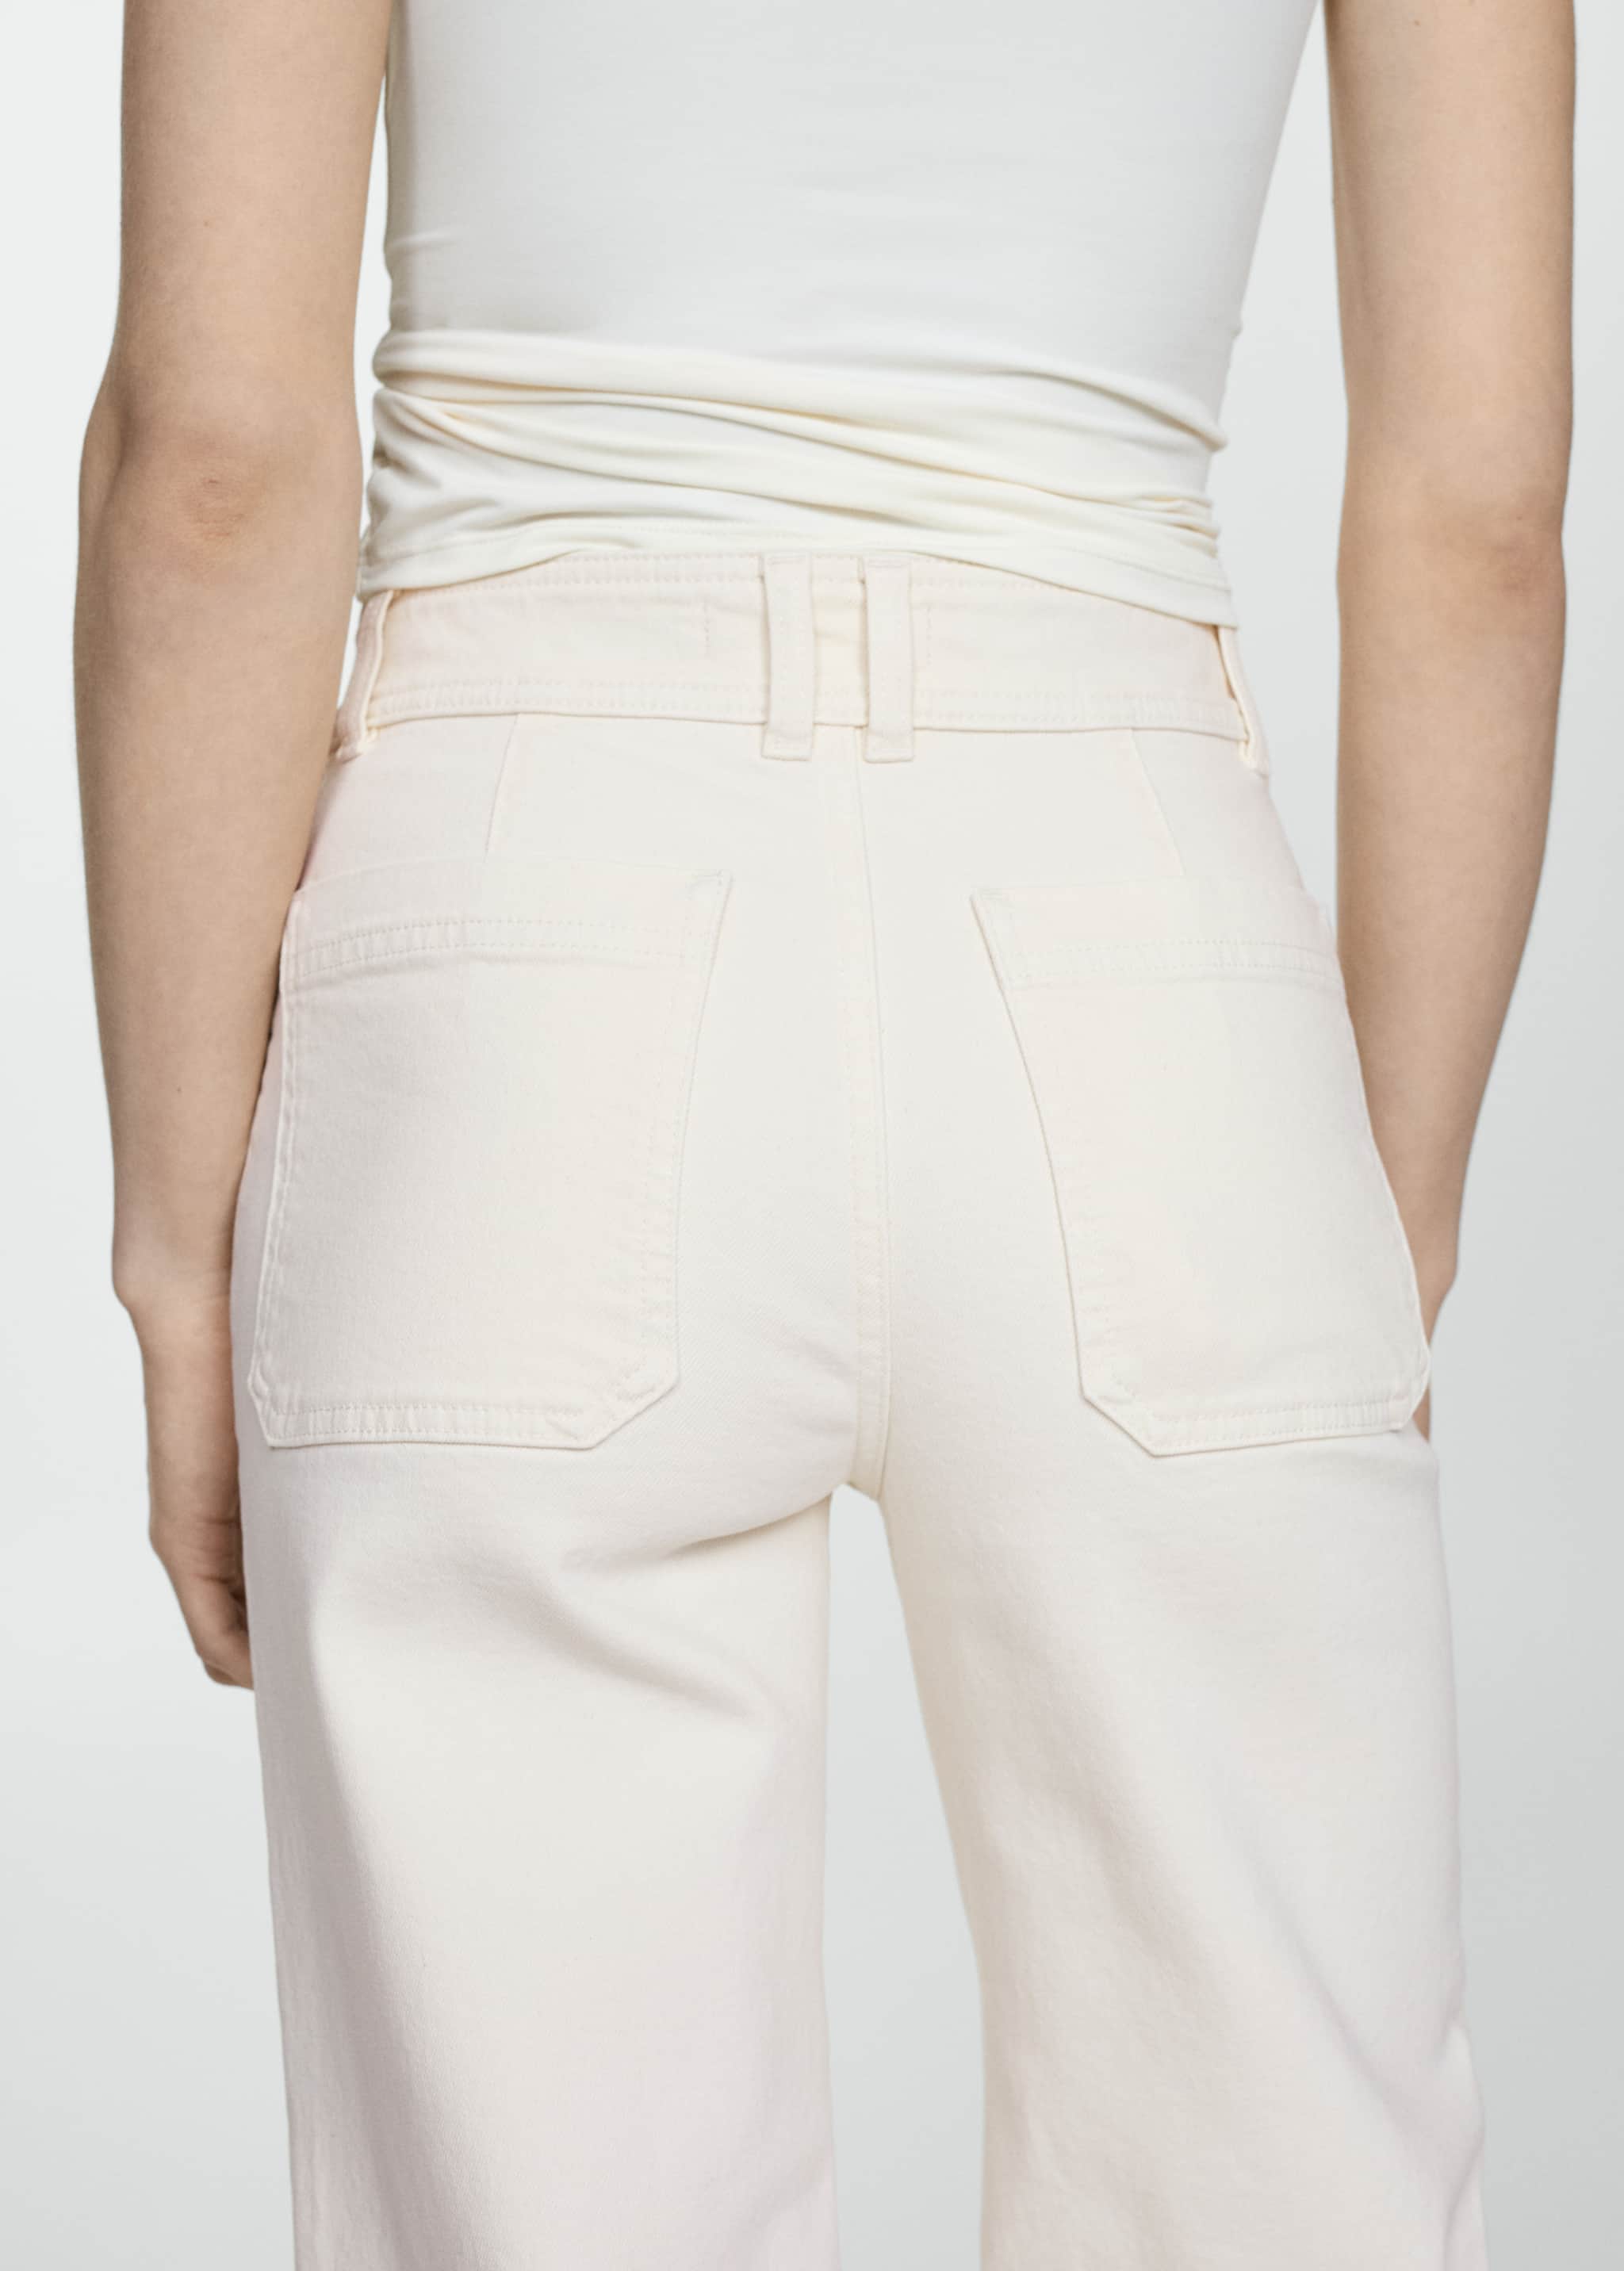 Catherin culotte high rise jeans - Details of the article 6